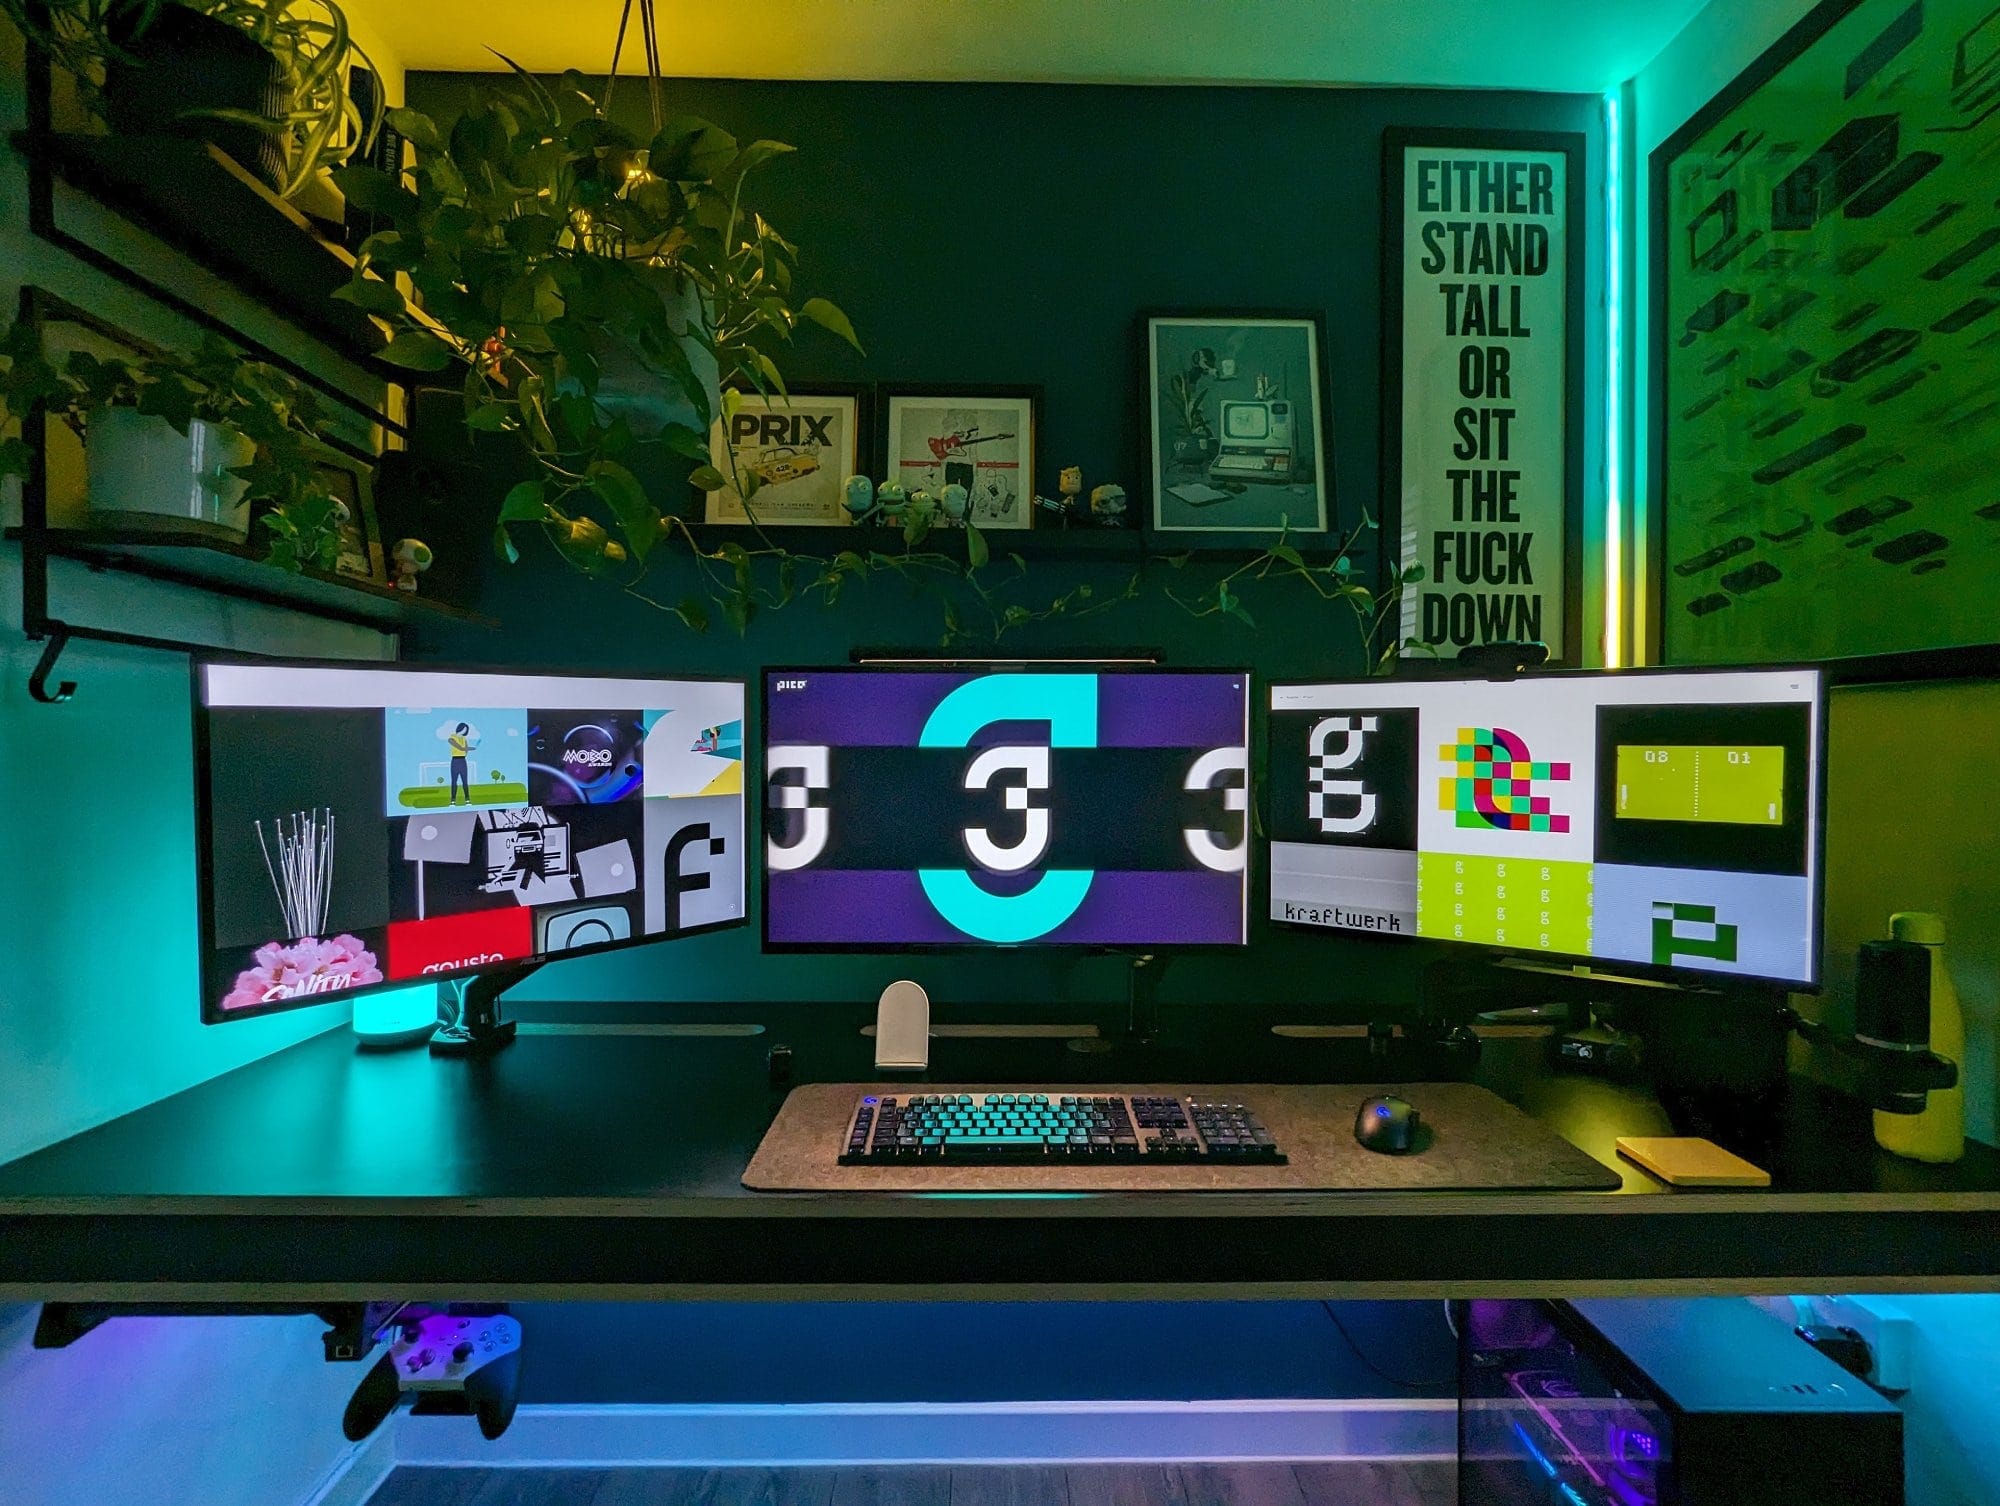 A contemporary home office setup with a sleek desk featuring a triple-monitor display, surrounded by vibrant plants, framed art, motivational posters, and ambient LED lighting